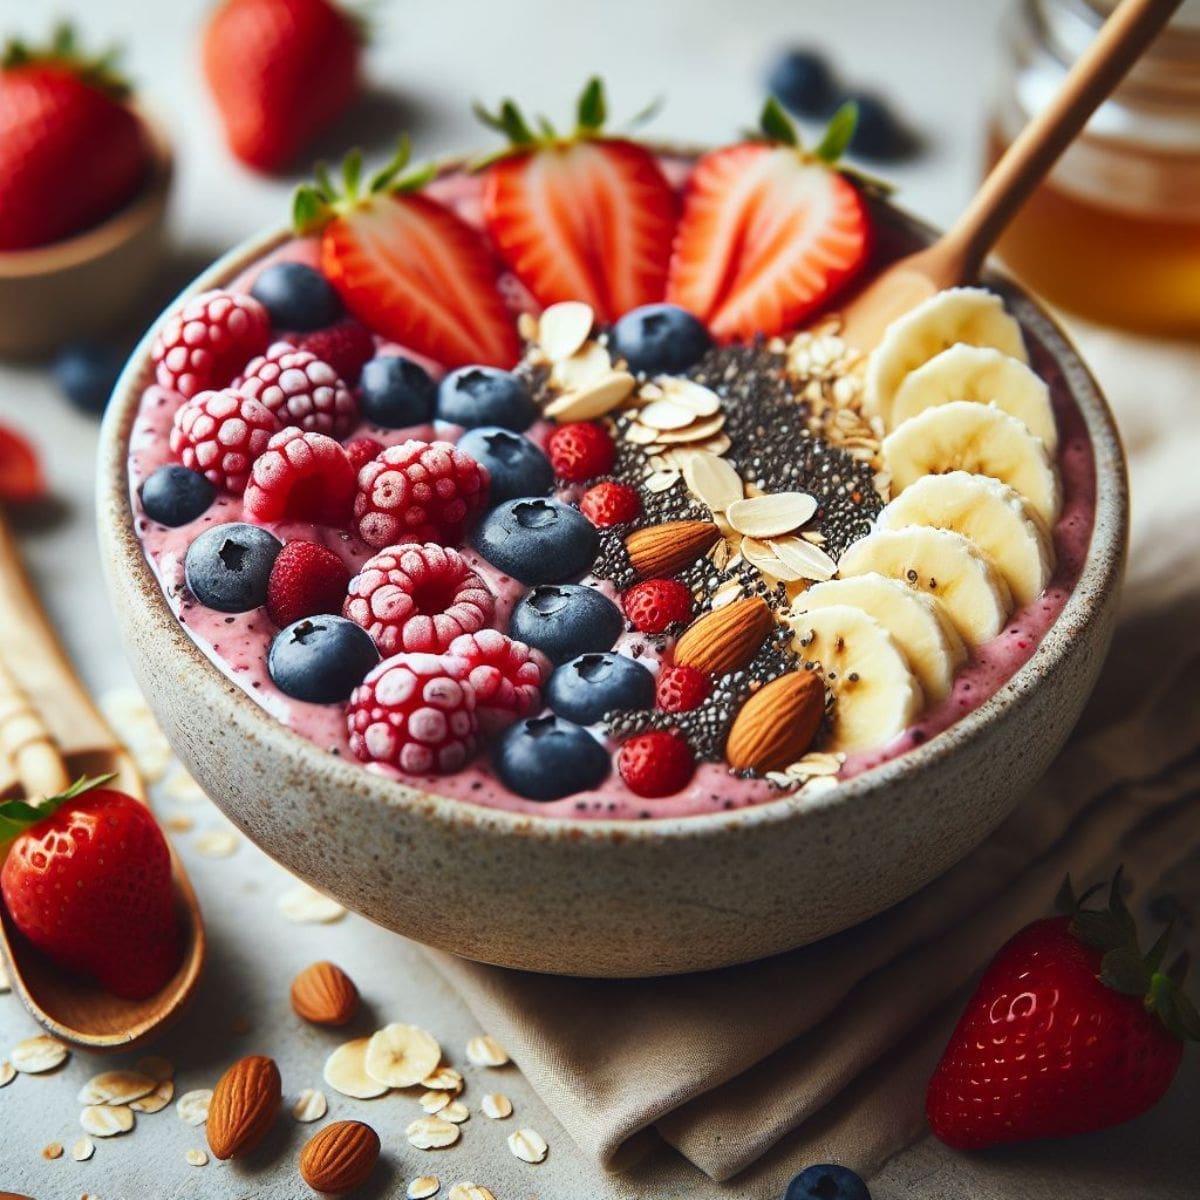 A close-up photo of a berry banana smoothie bowl topped with granola, banana slices, strawberries, blueberries, goji berries, and chia seeds.